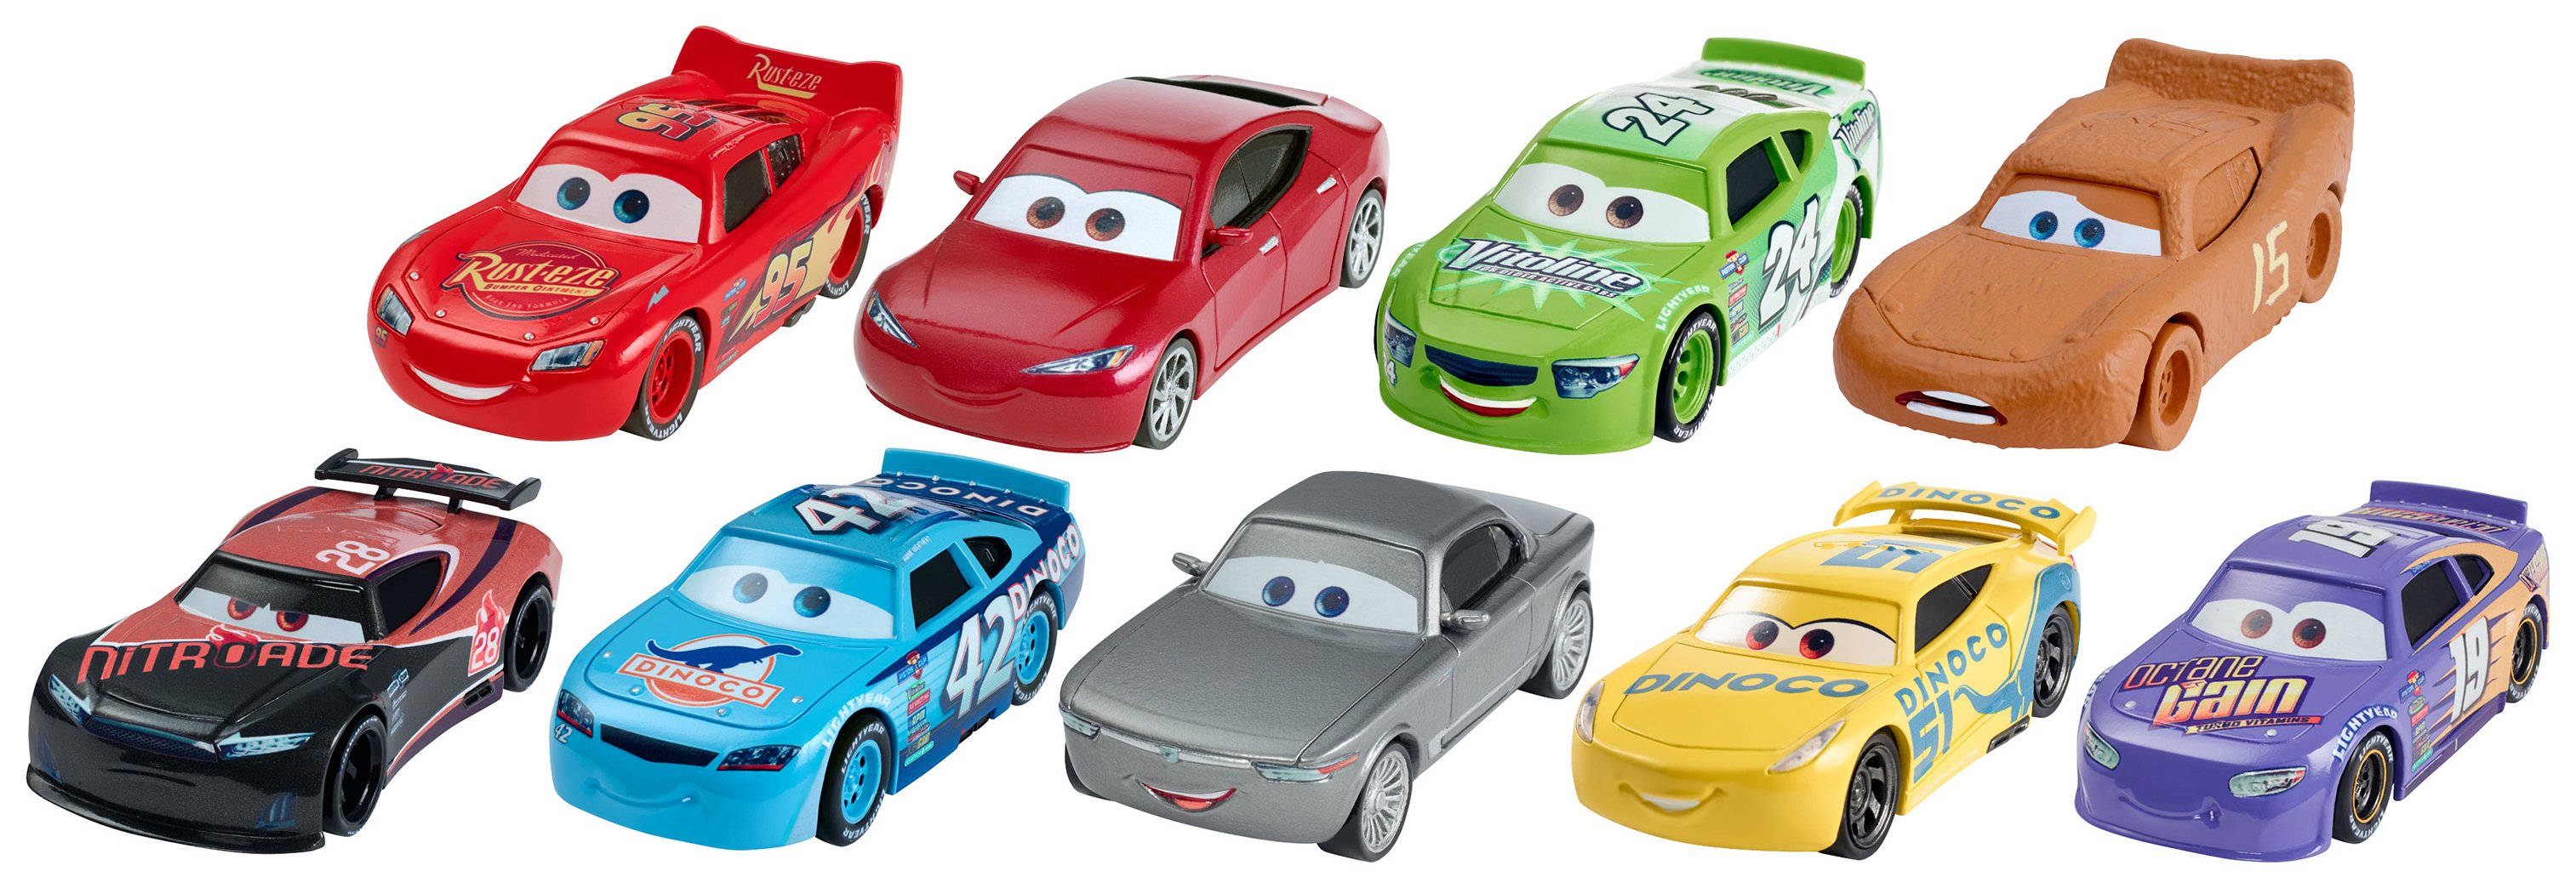 cars disney toys collection